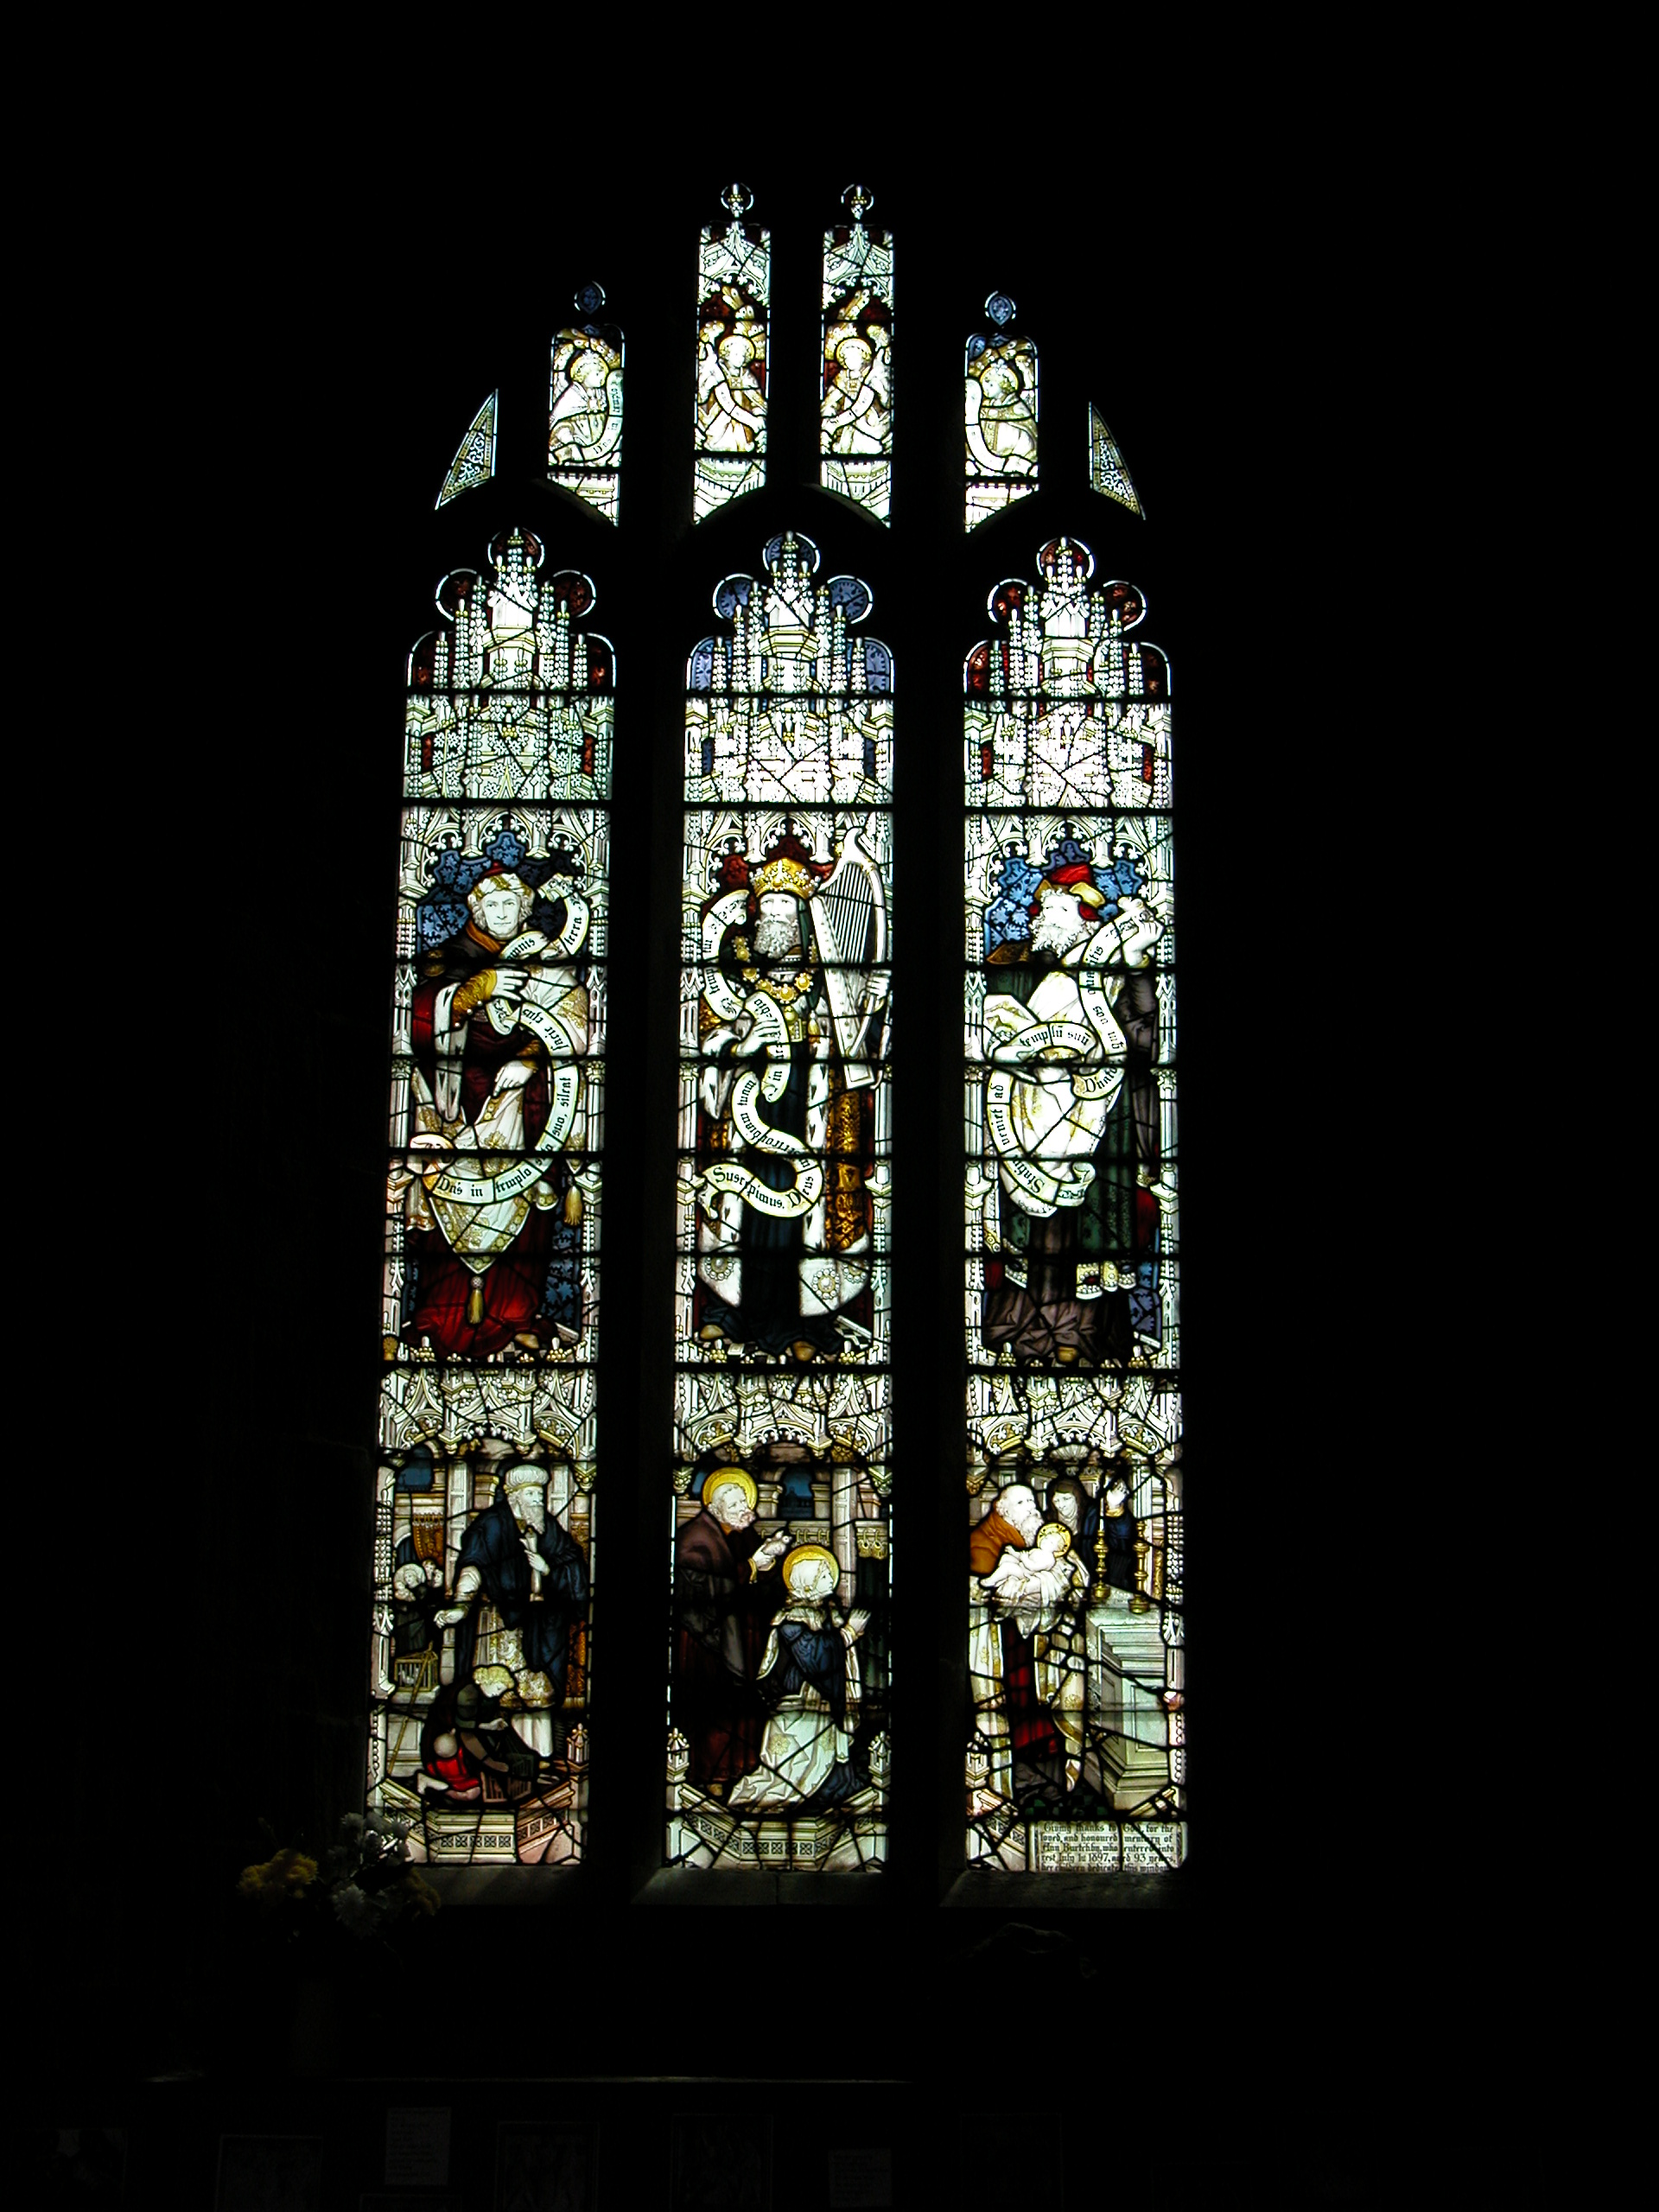 walls windows glass stained stainedglass art saint saints man woman church cathedral jesus catholic gothic